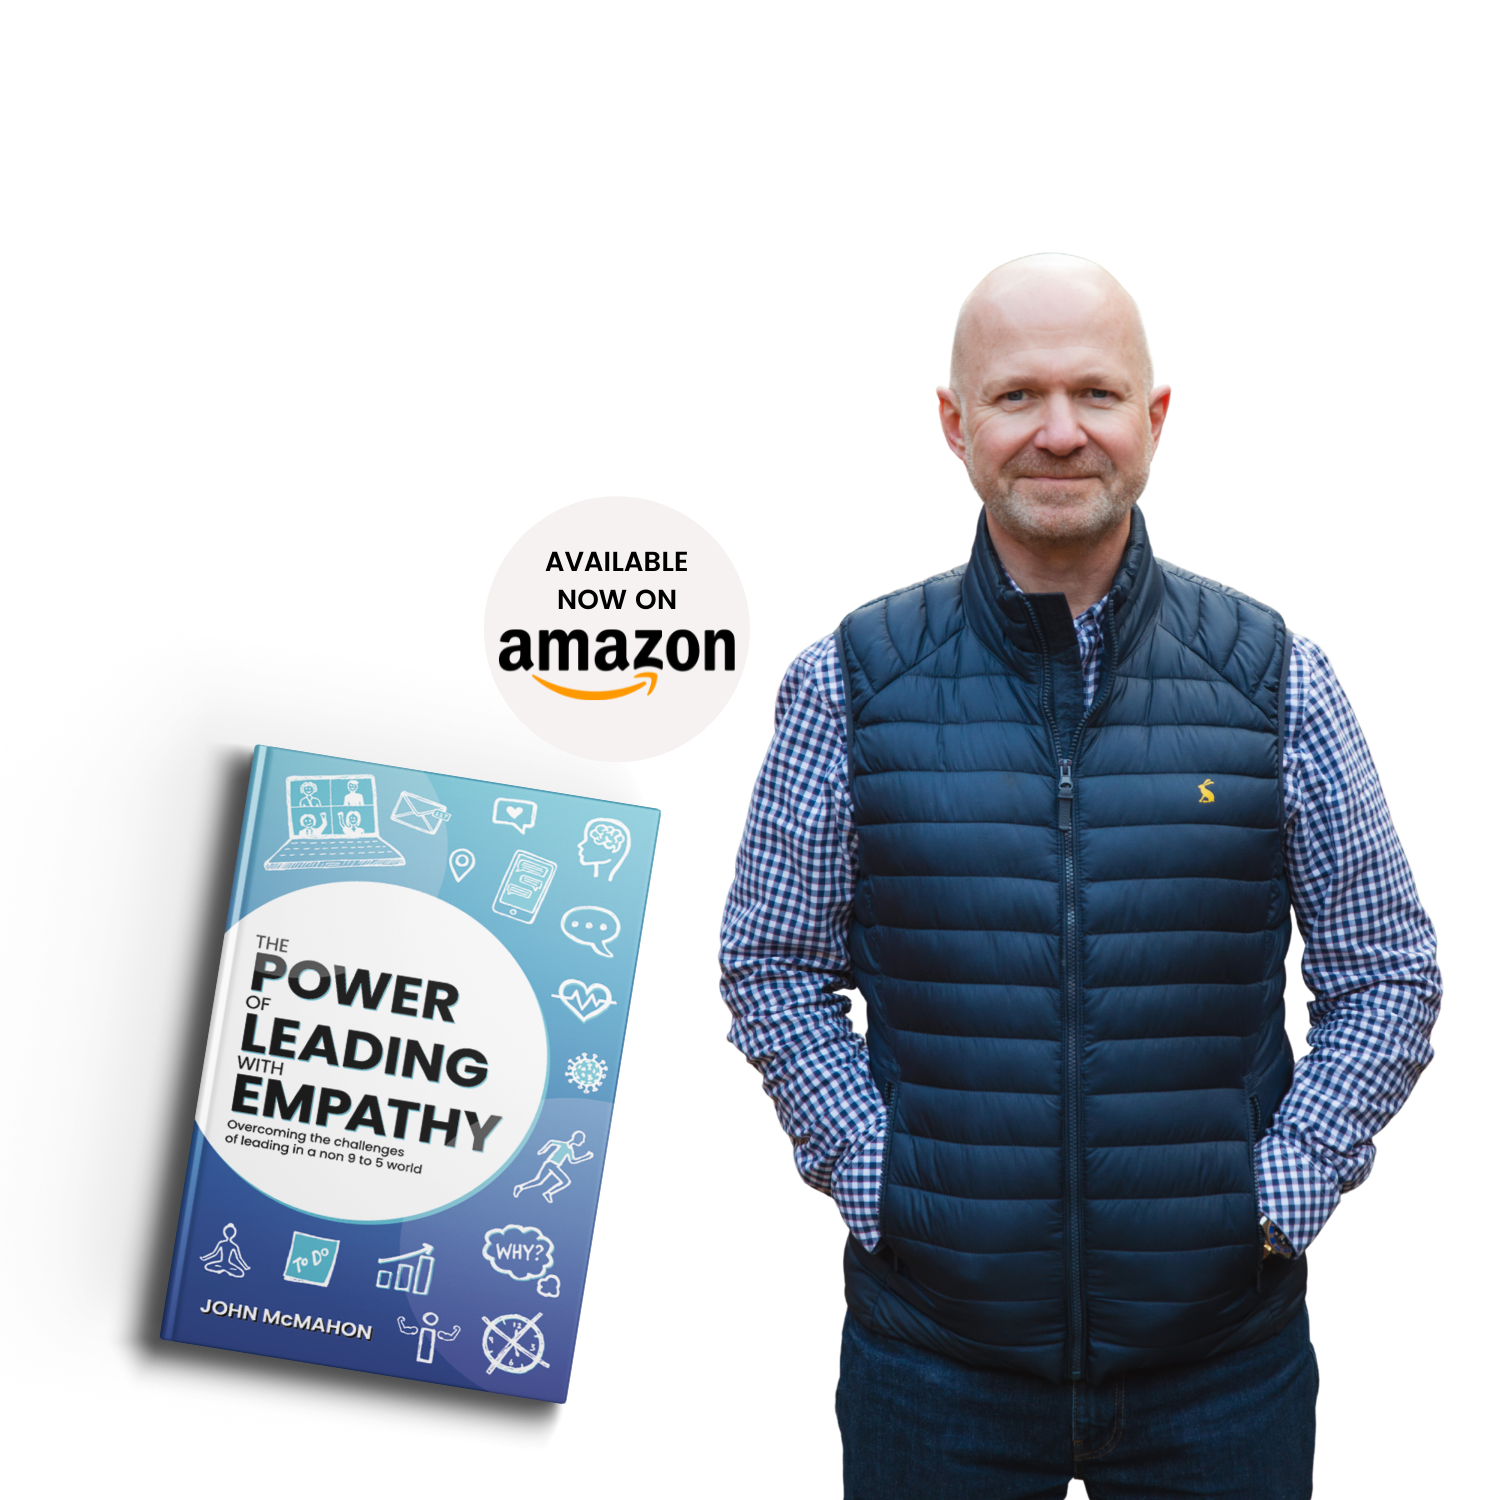 John McMahon with his book The Power of Leading with Empathy, now available on Amazon